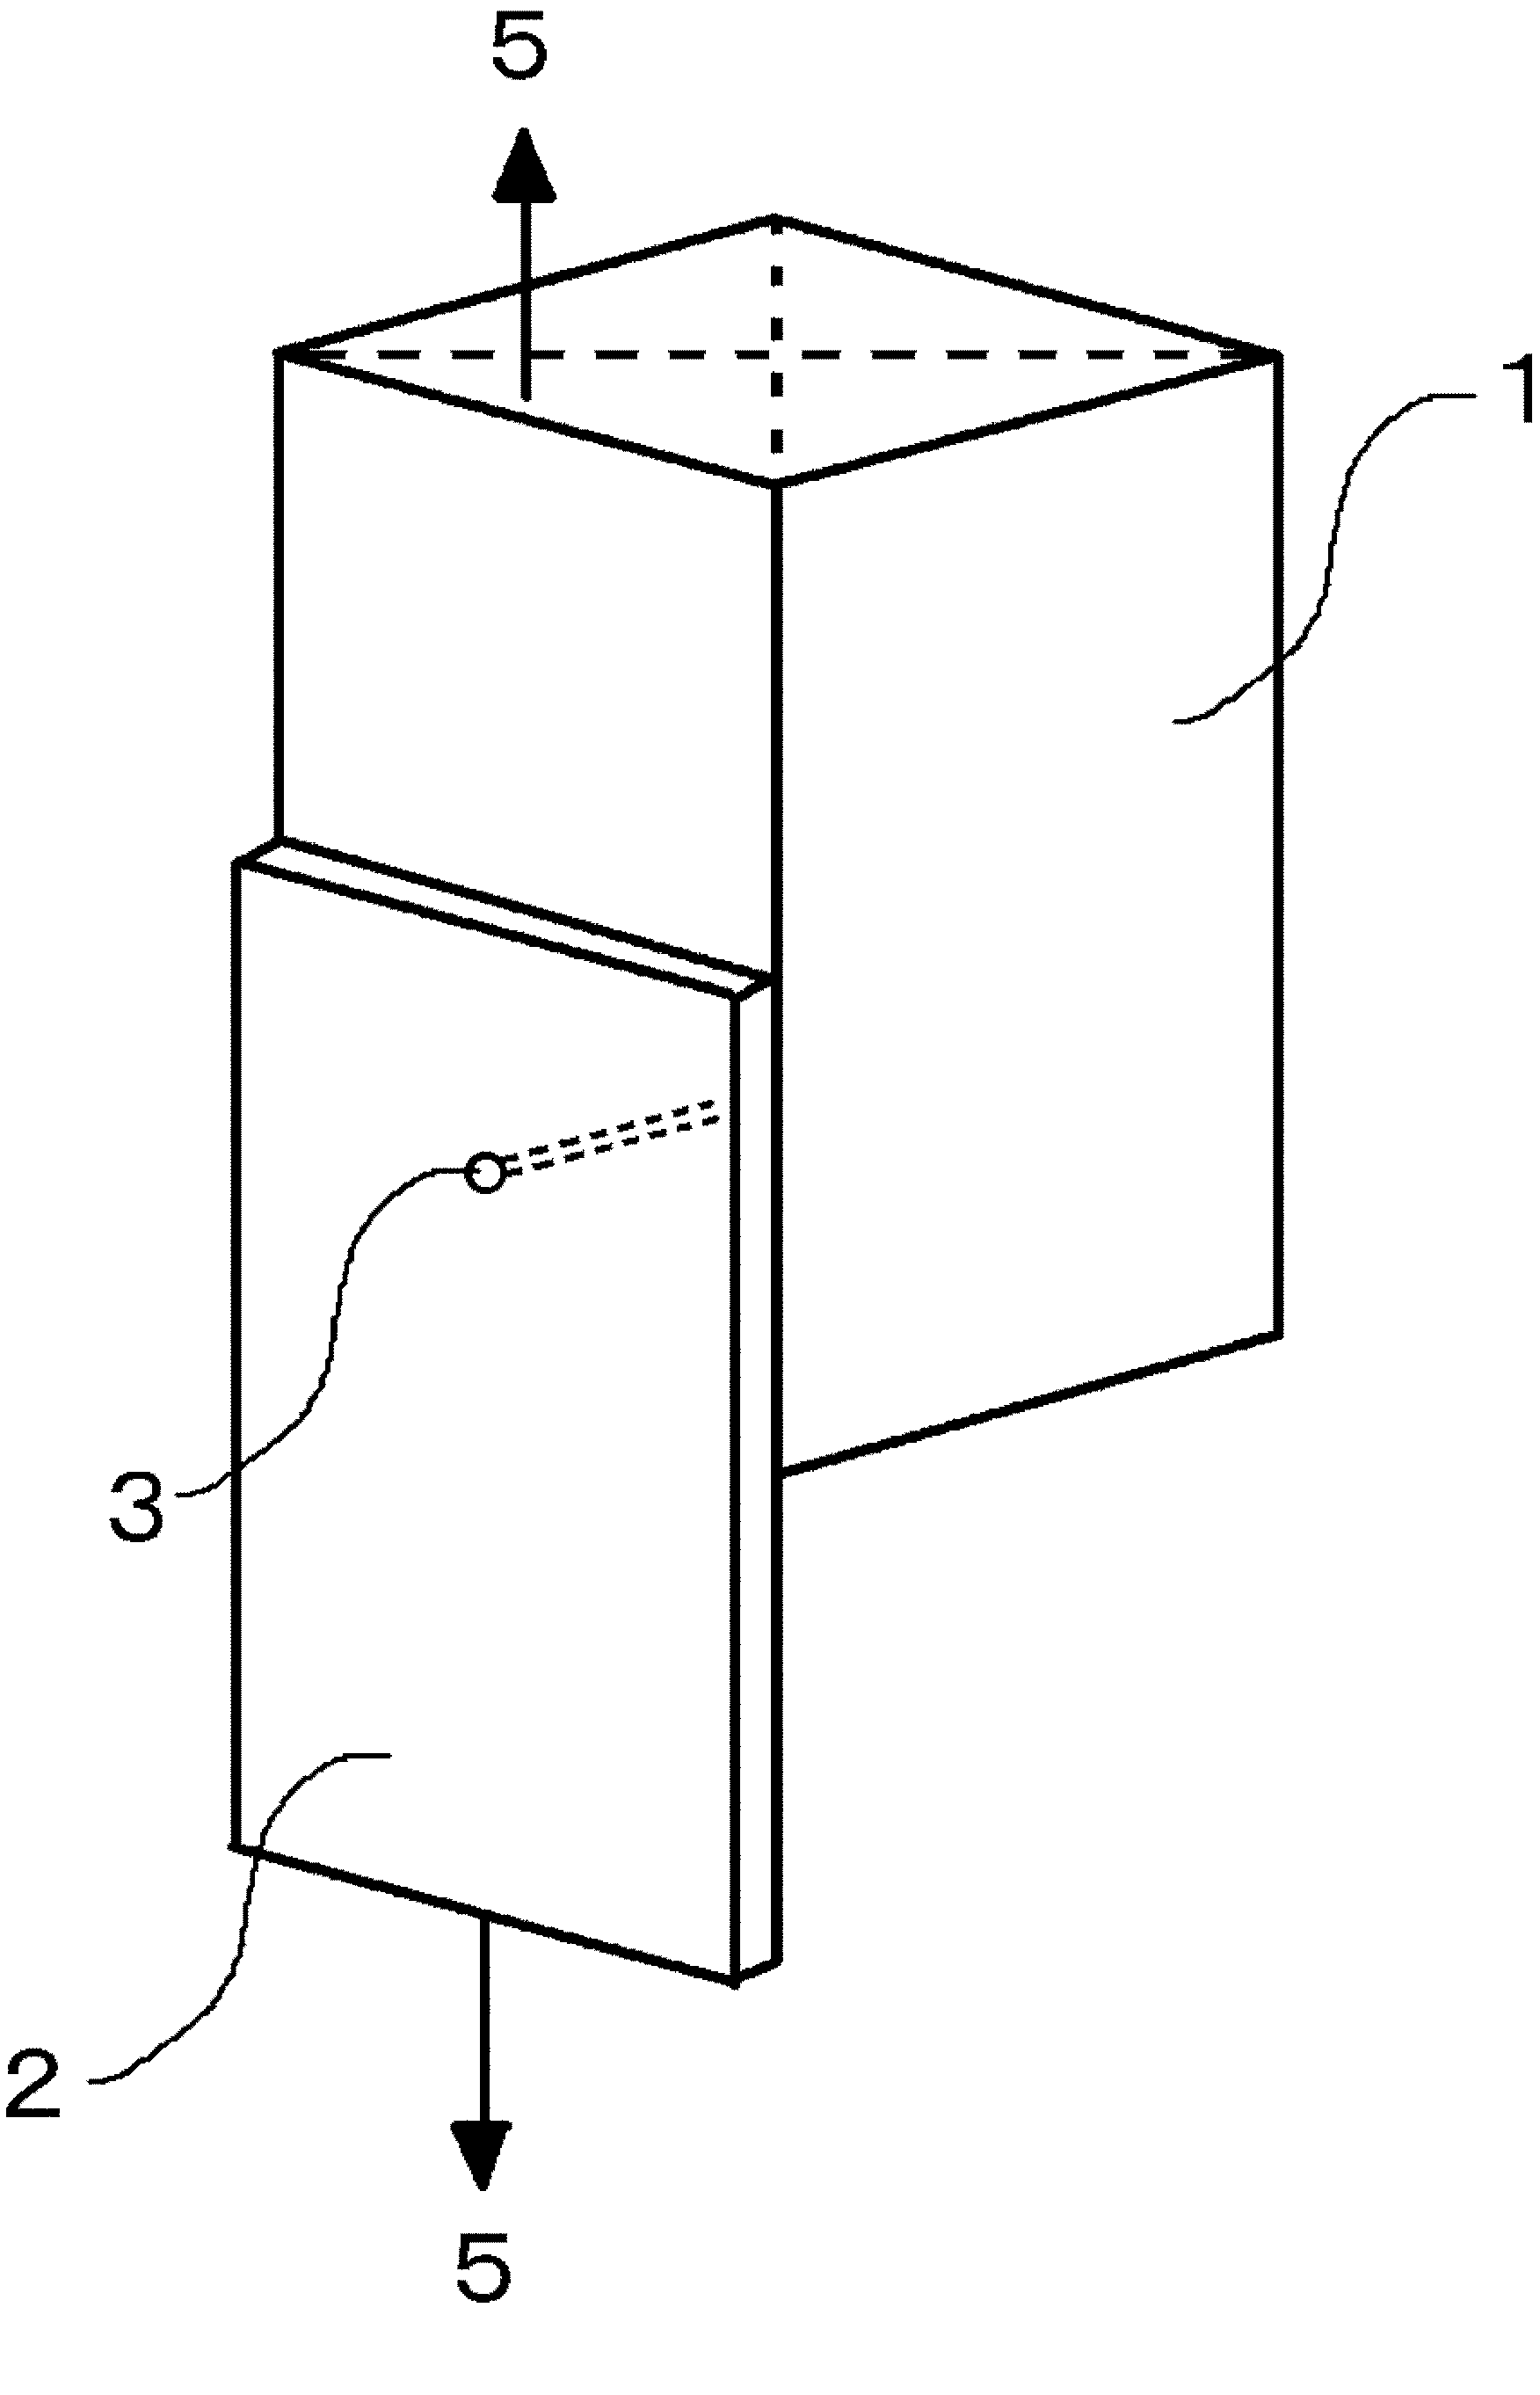 Installation structure of base of exterior wall